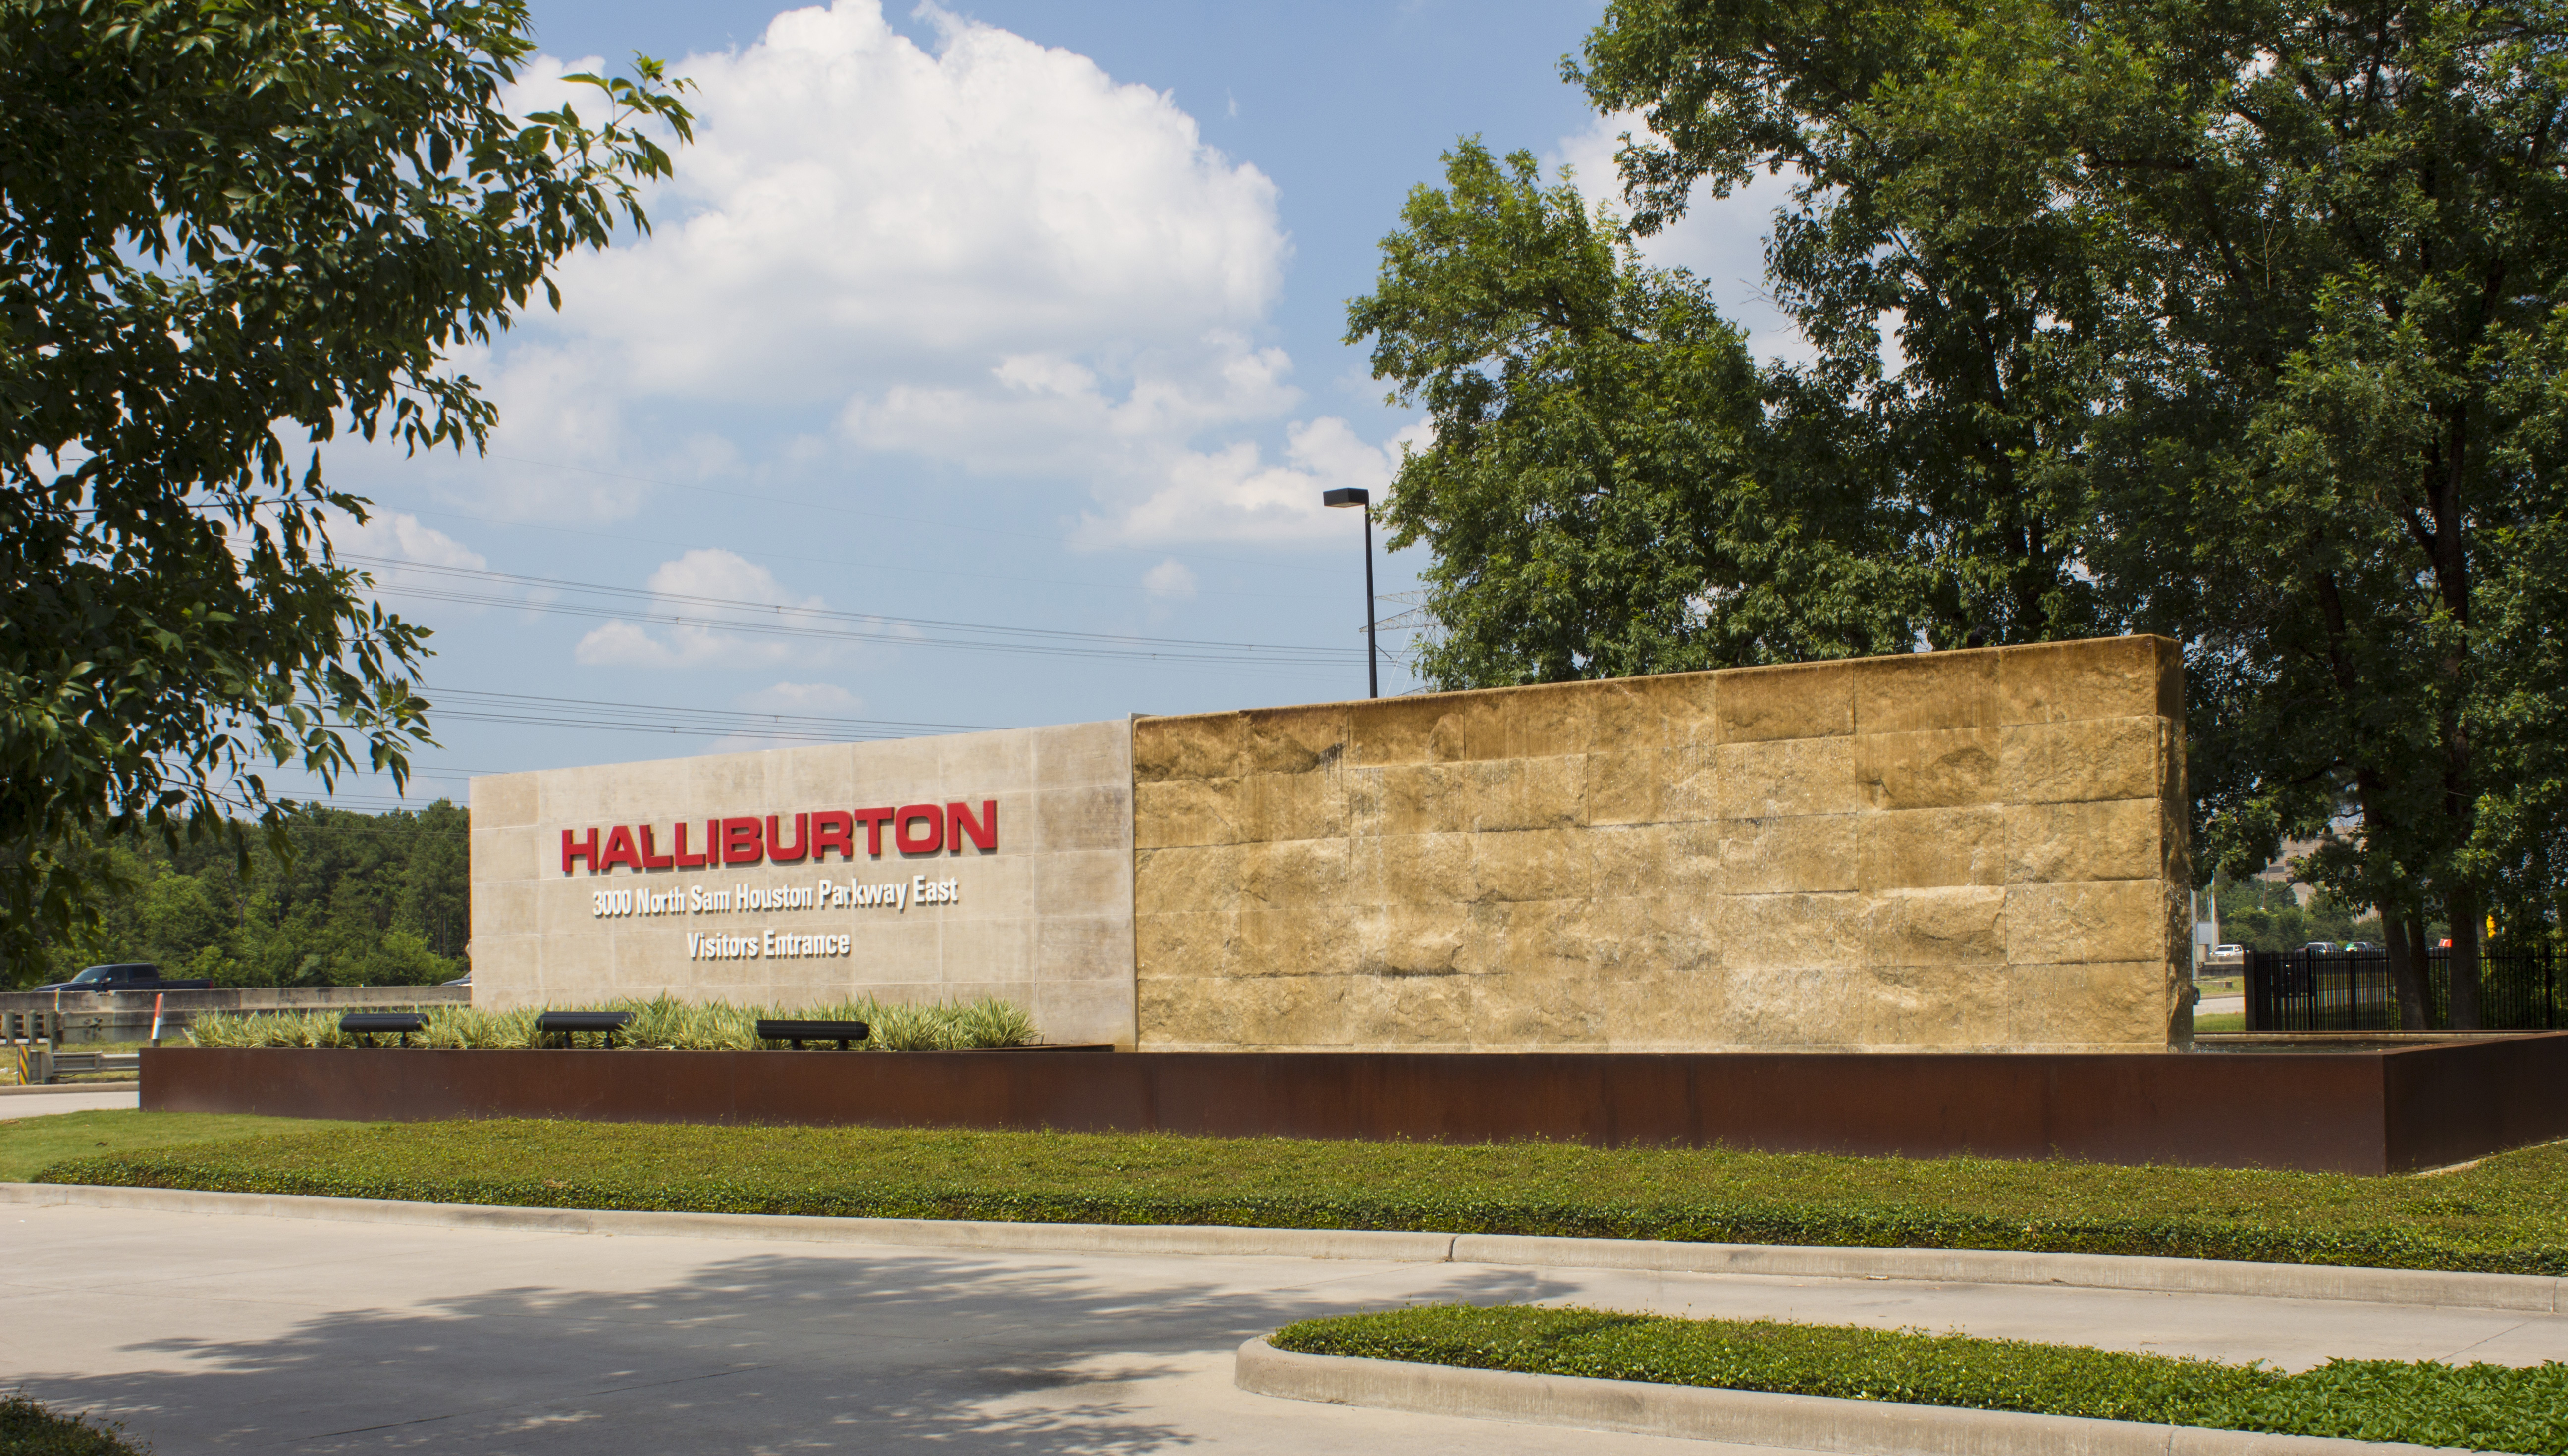 The sign at the entrance to Halliburton's North Belt Campus